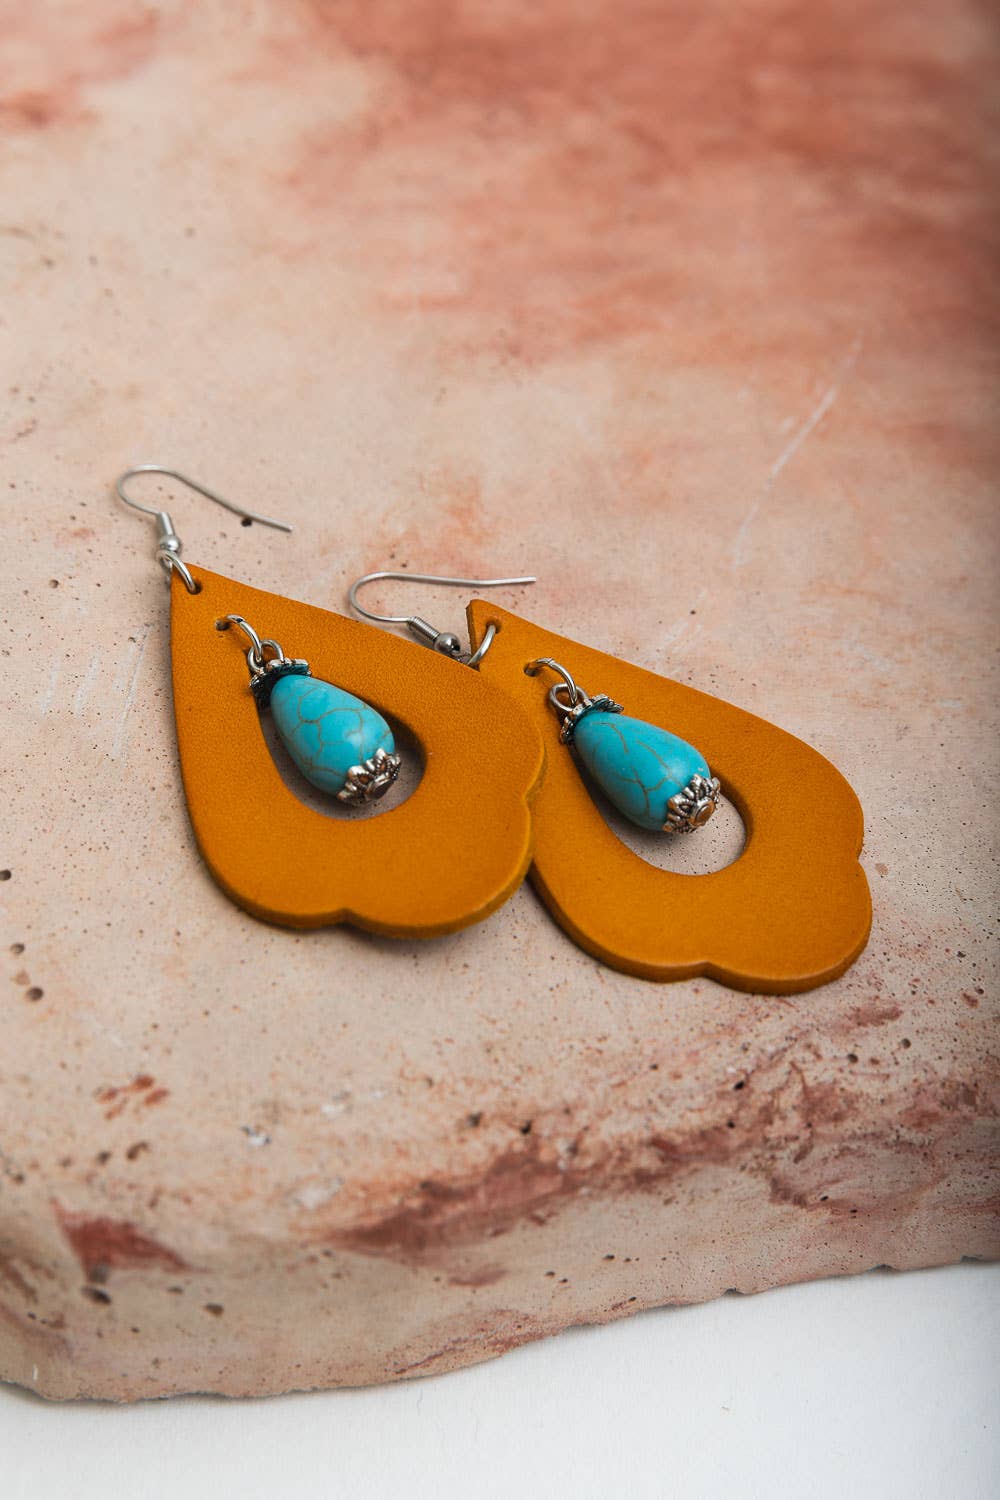 Western Leather Cutout Earrings with Turquoise Stone